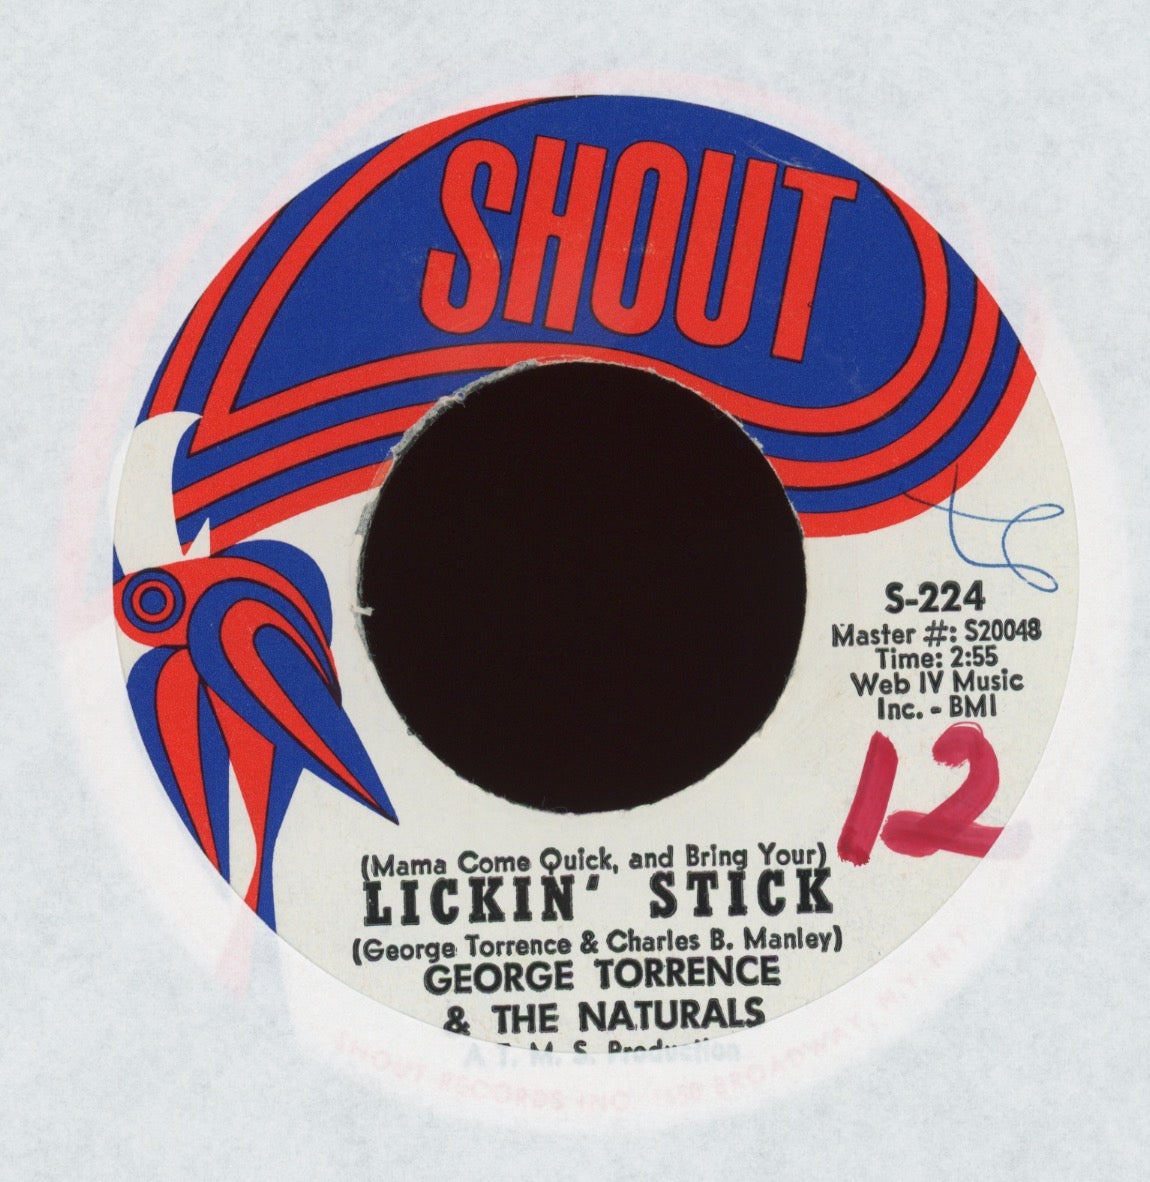 George Torrence & The Naturals - Lickin' Stick on Shout Funk 45